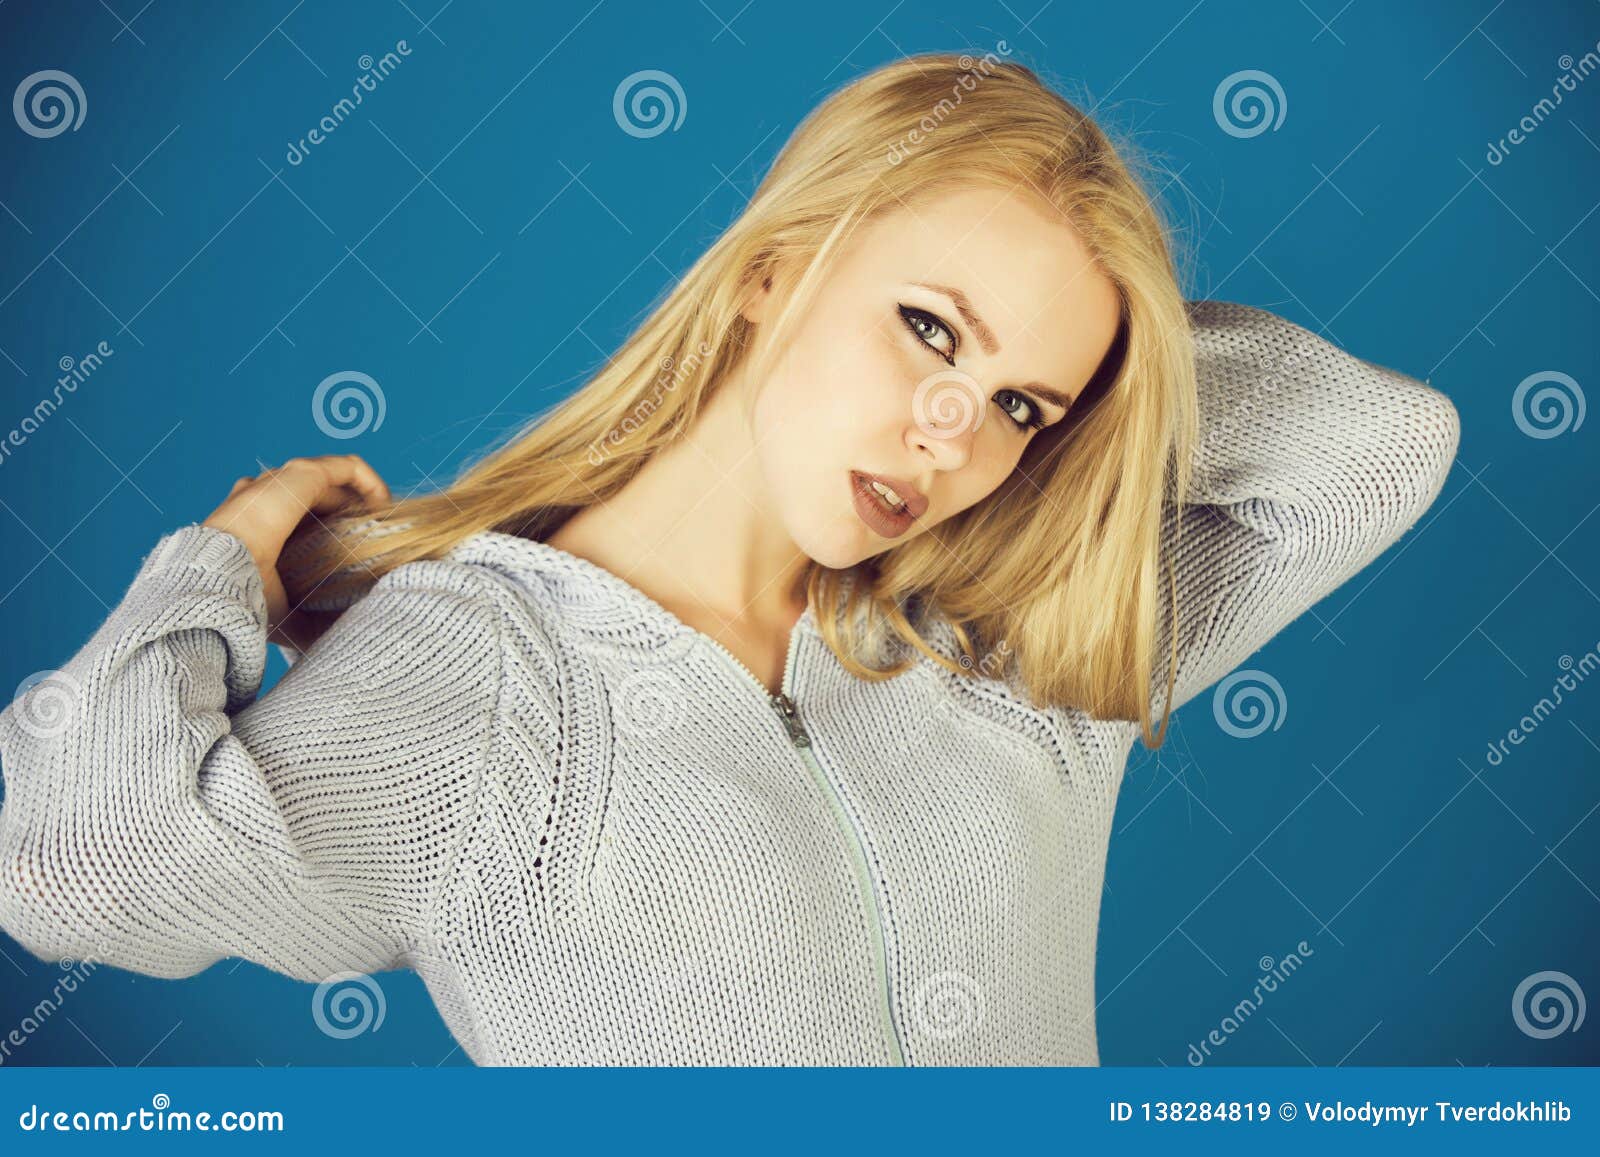 Beauty And Fashion Woman With Long Hair And Adorable Face